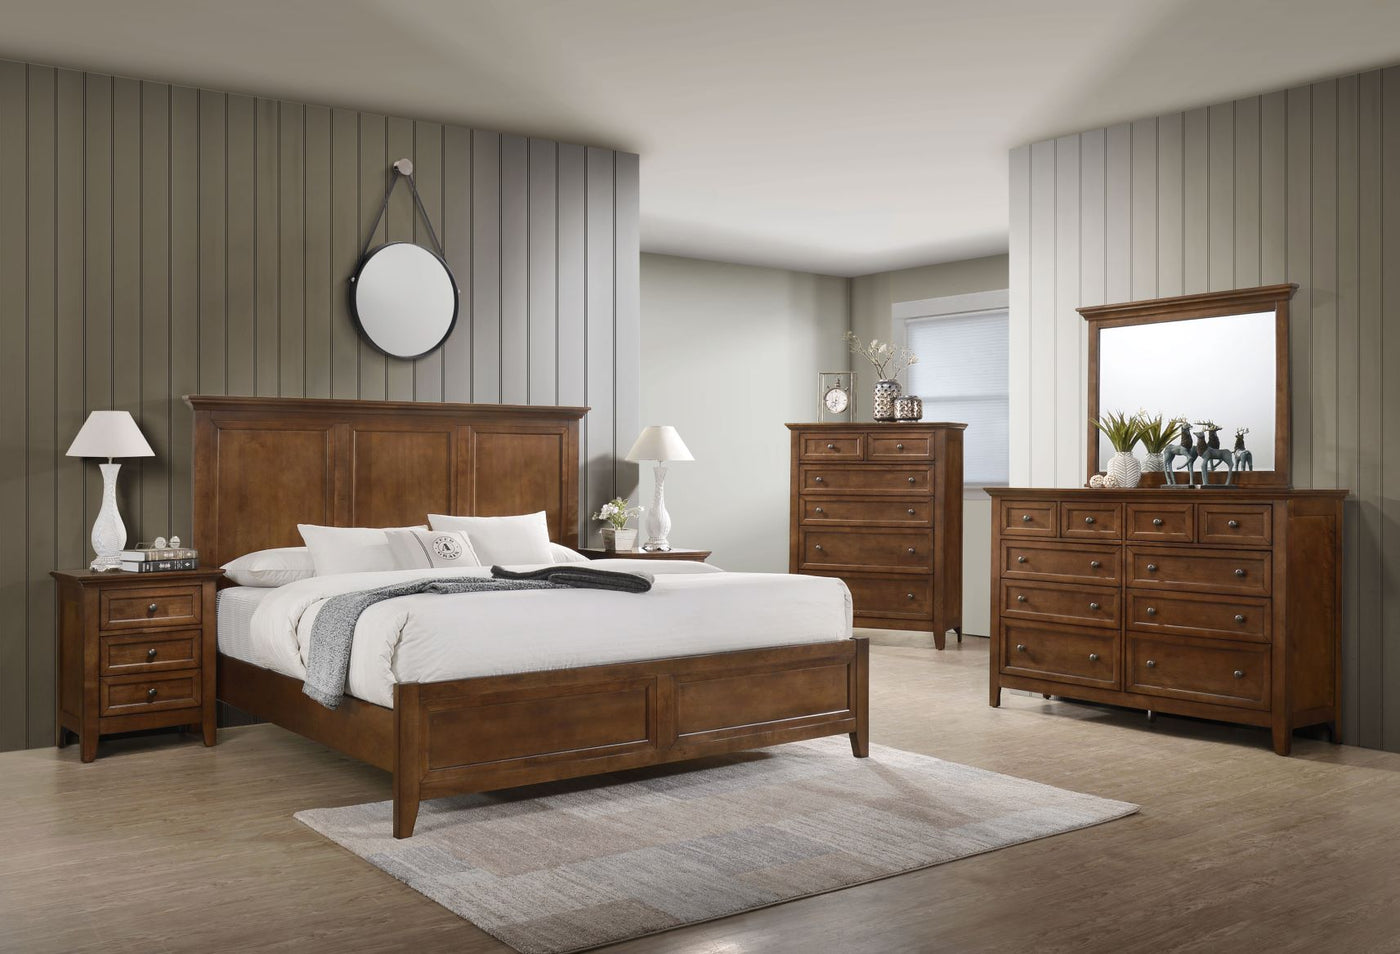 San Mateo 6-Piece King Bedroom Package-Tuscan